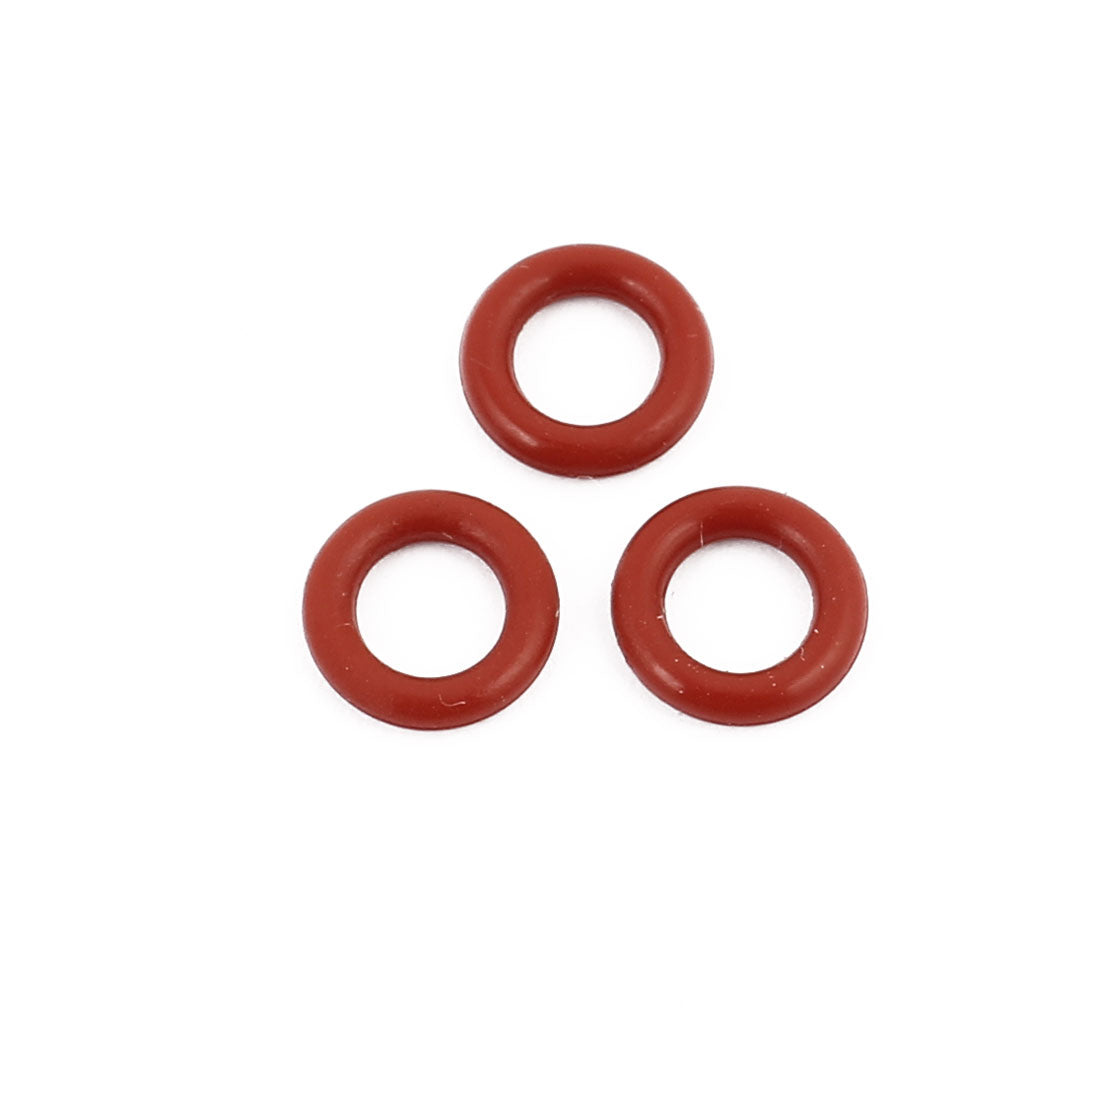 uxcell Uxcell 20Pcs 9mm x 1.9mm Rubber O-rings NBR Heat Resistant Sealing Ring Grommets Red